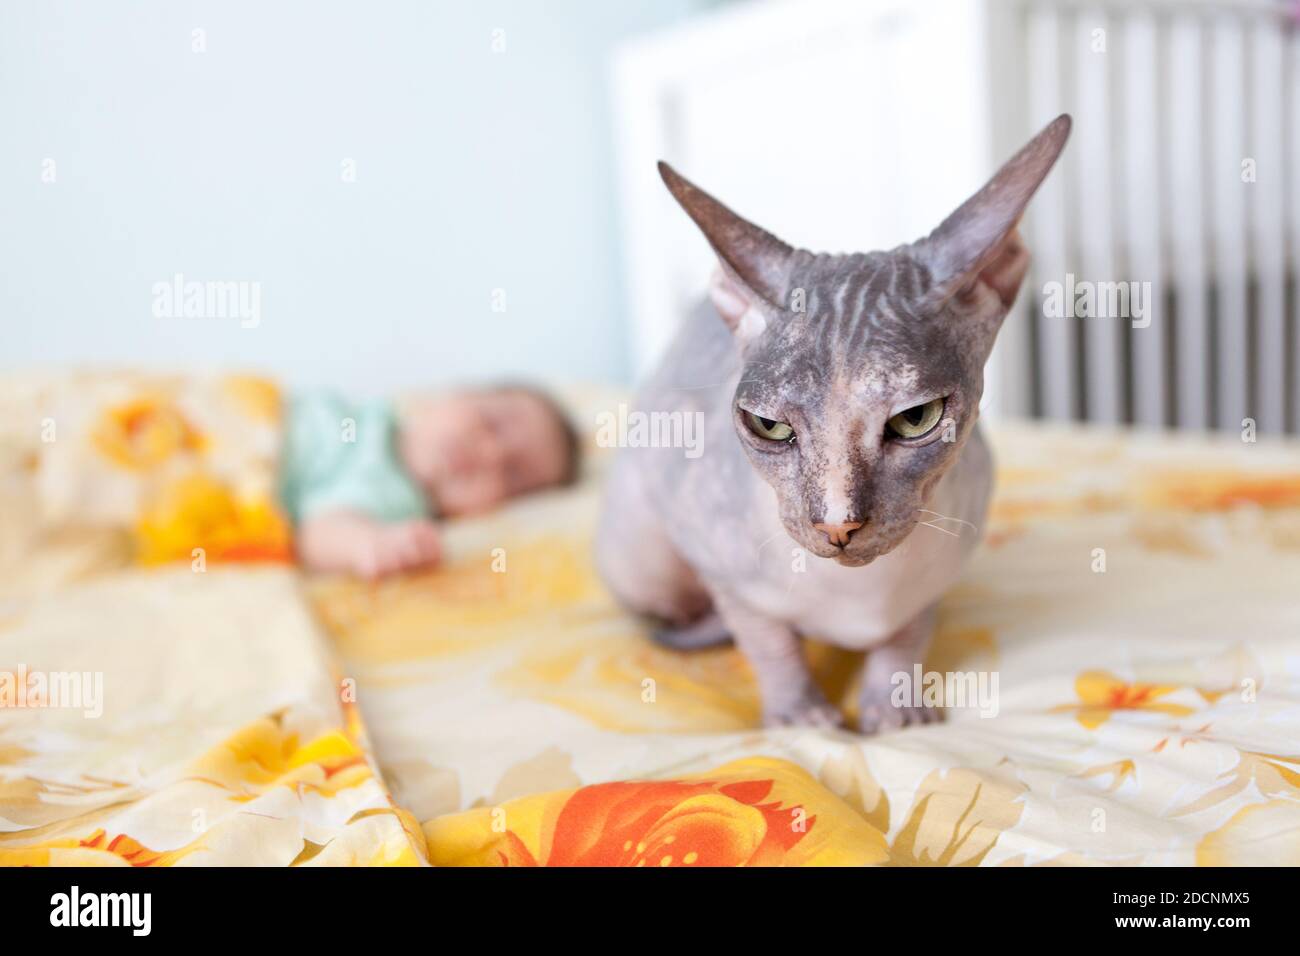 Bald sphynx cat babysitting after newborn infant sleeping on sofa in a domestic bedroom Stock Photo